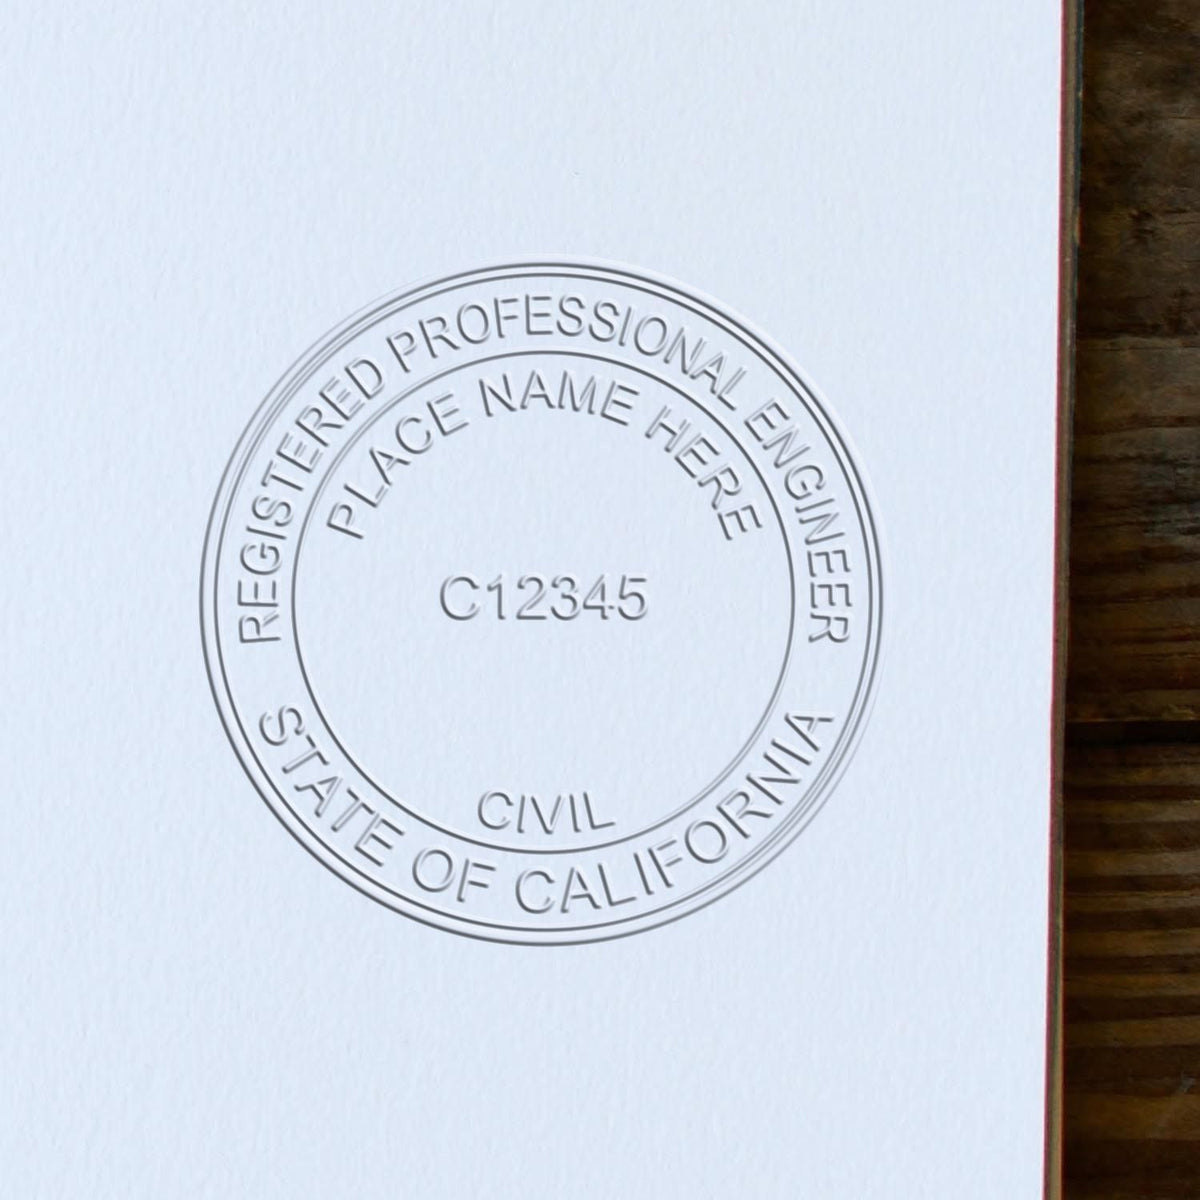 An alternative view of the Heavy Duty Cast Iron California Engineer Seal Embosser stamped on a sheet of paper showing the image in use